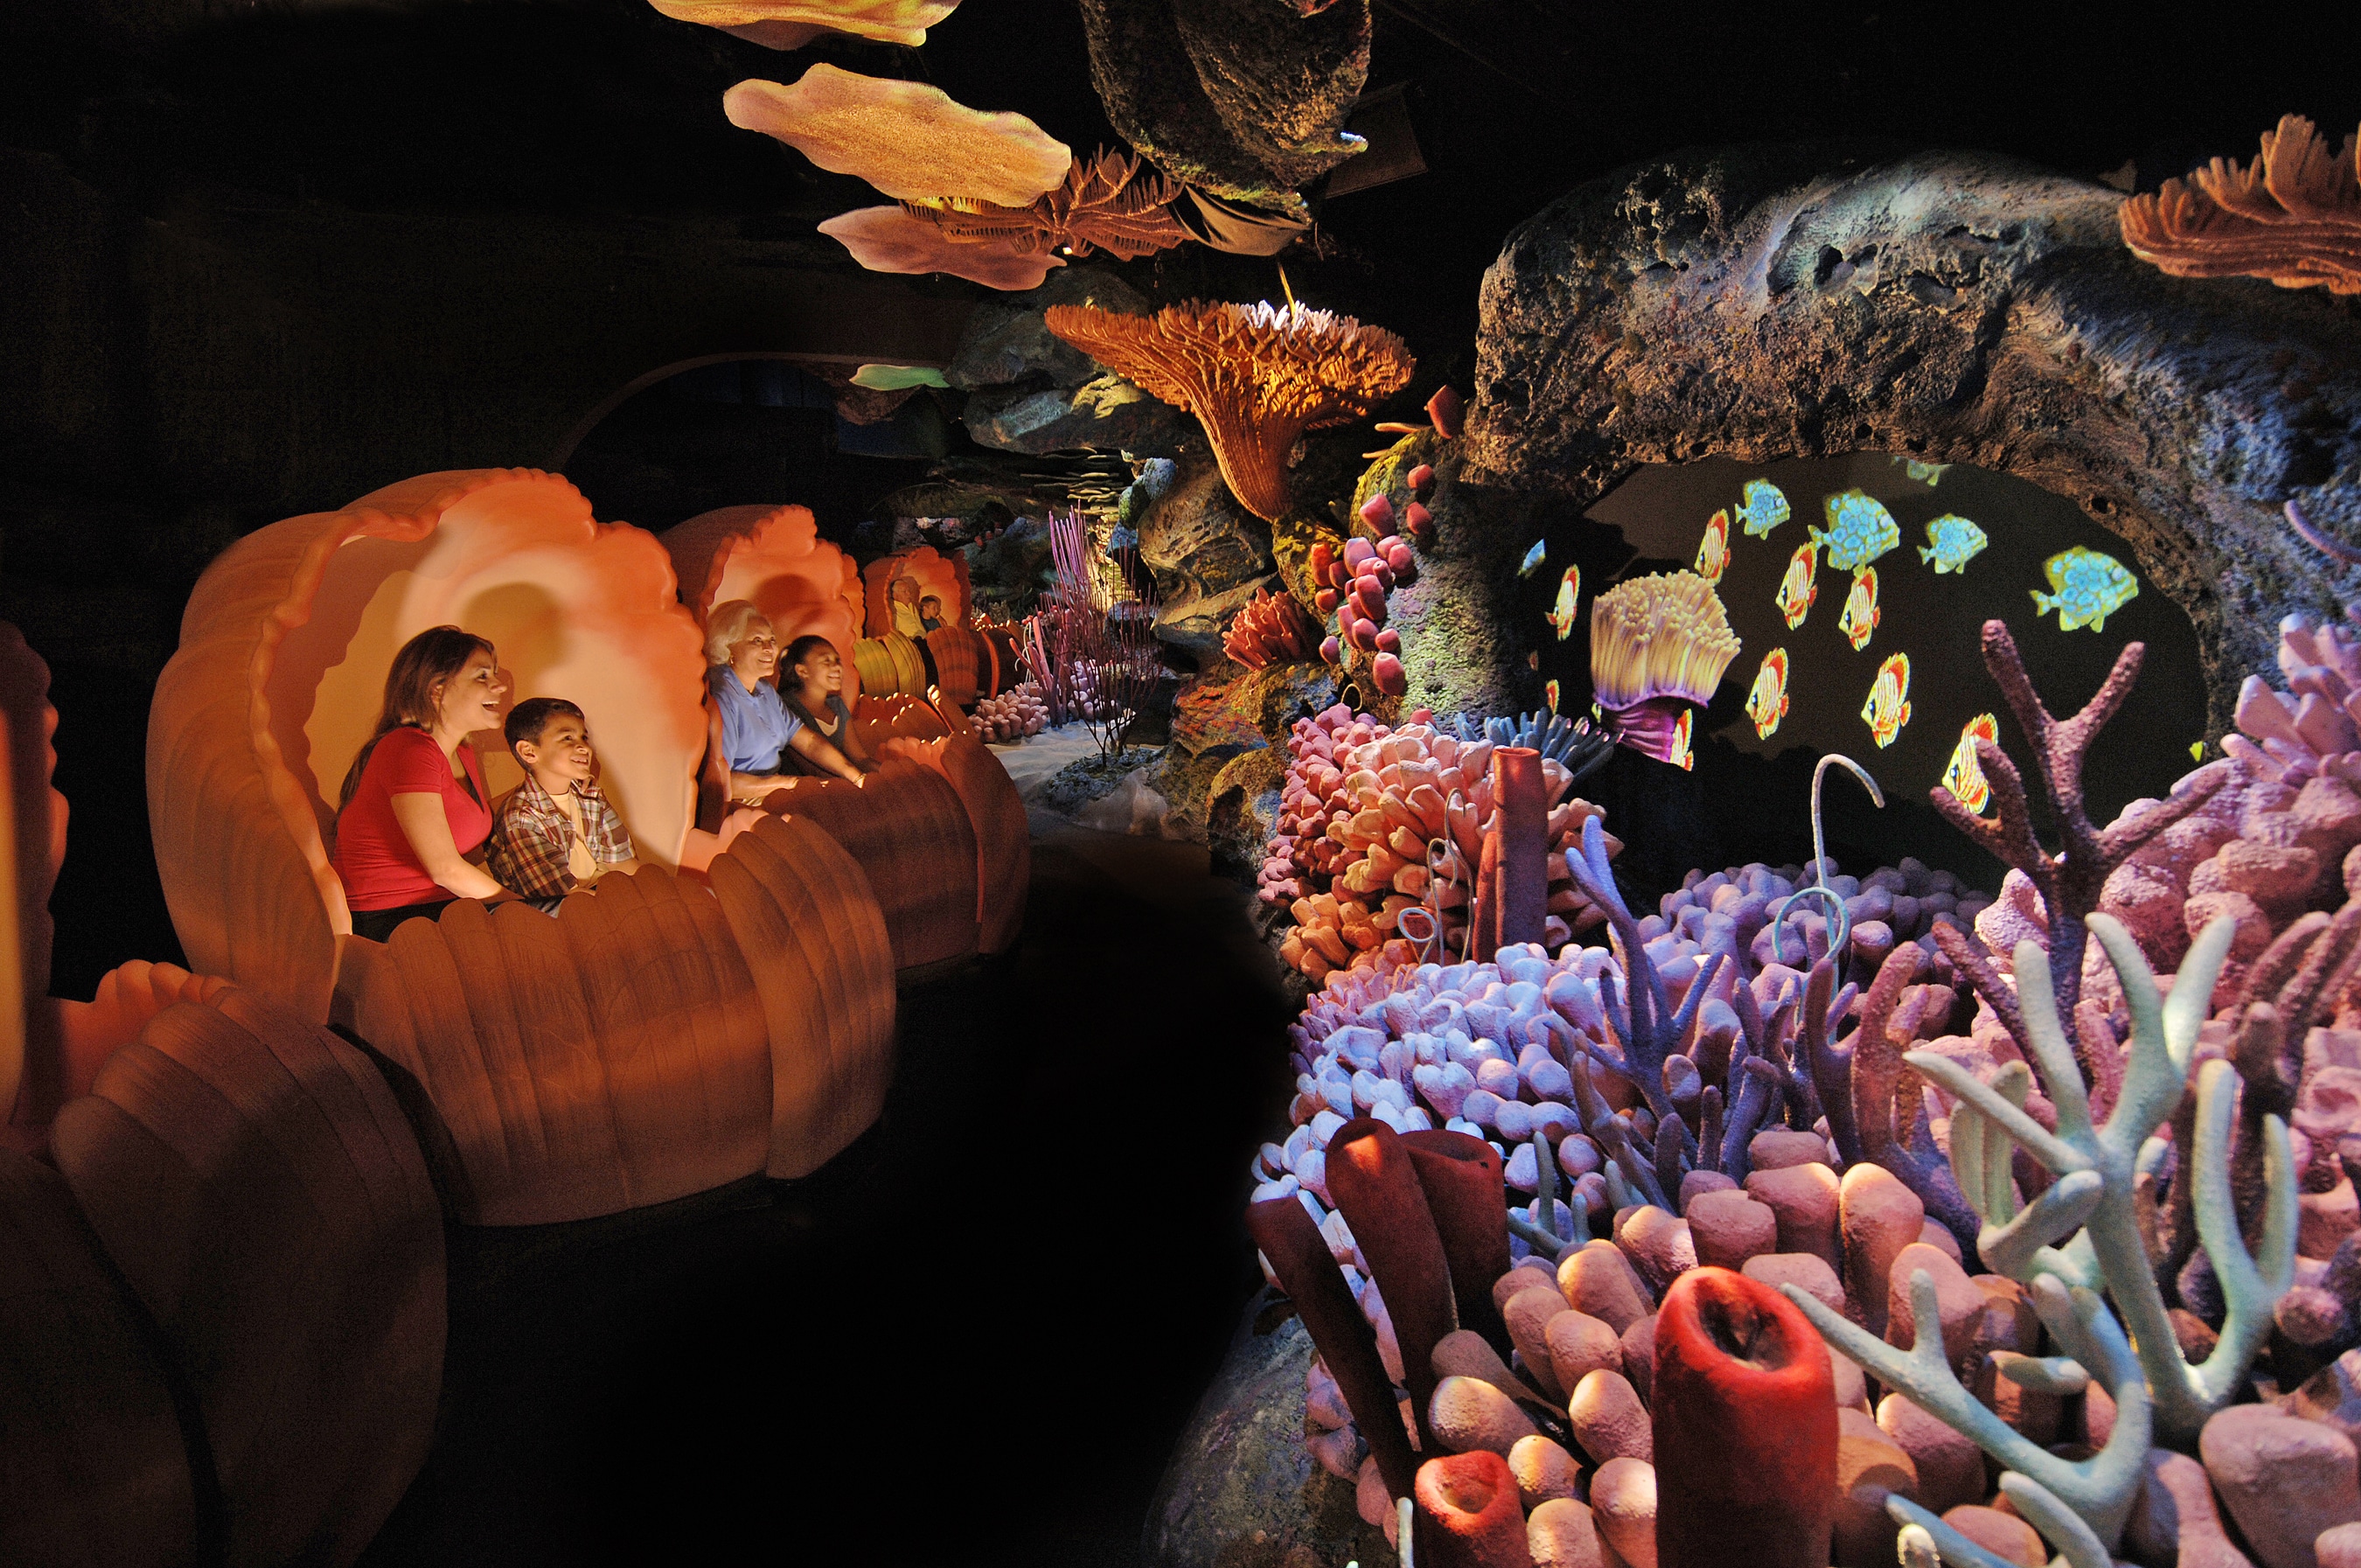 Under the Seas with Nemo & Friends at Epcot